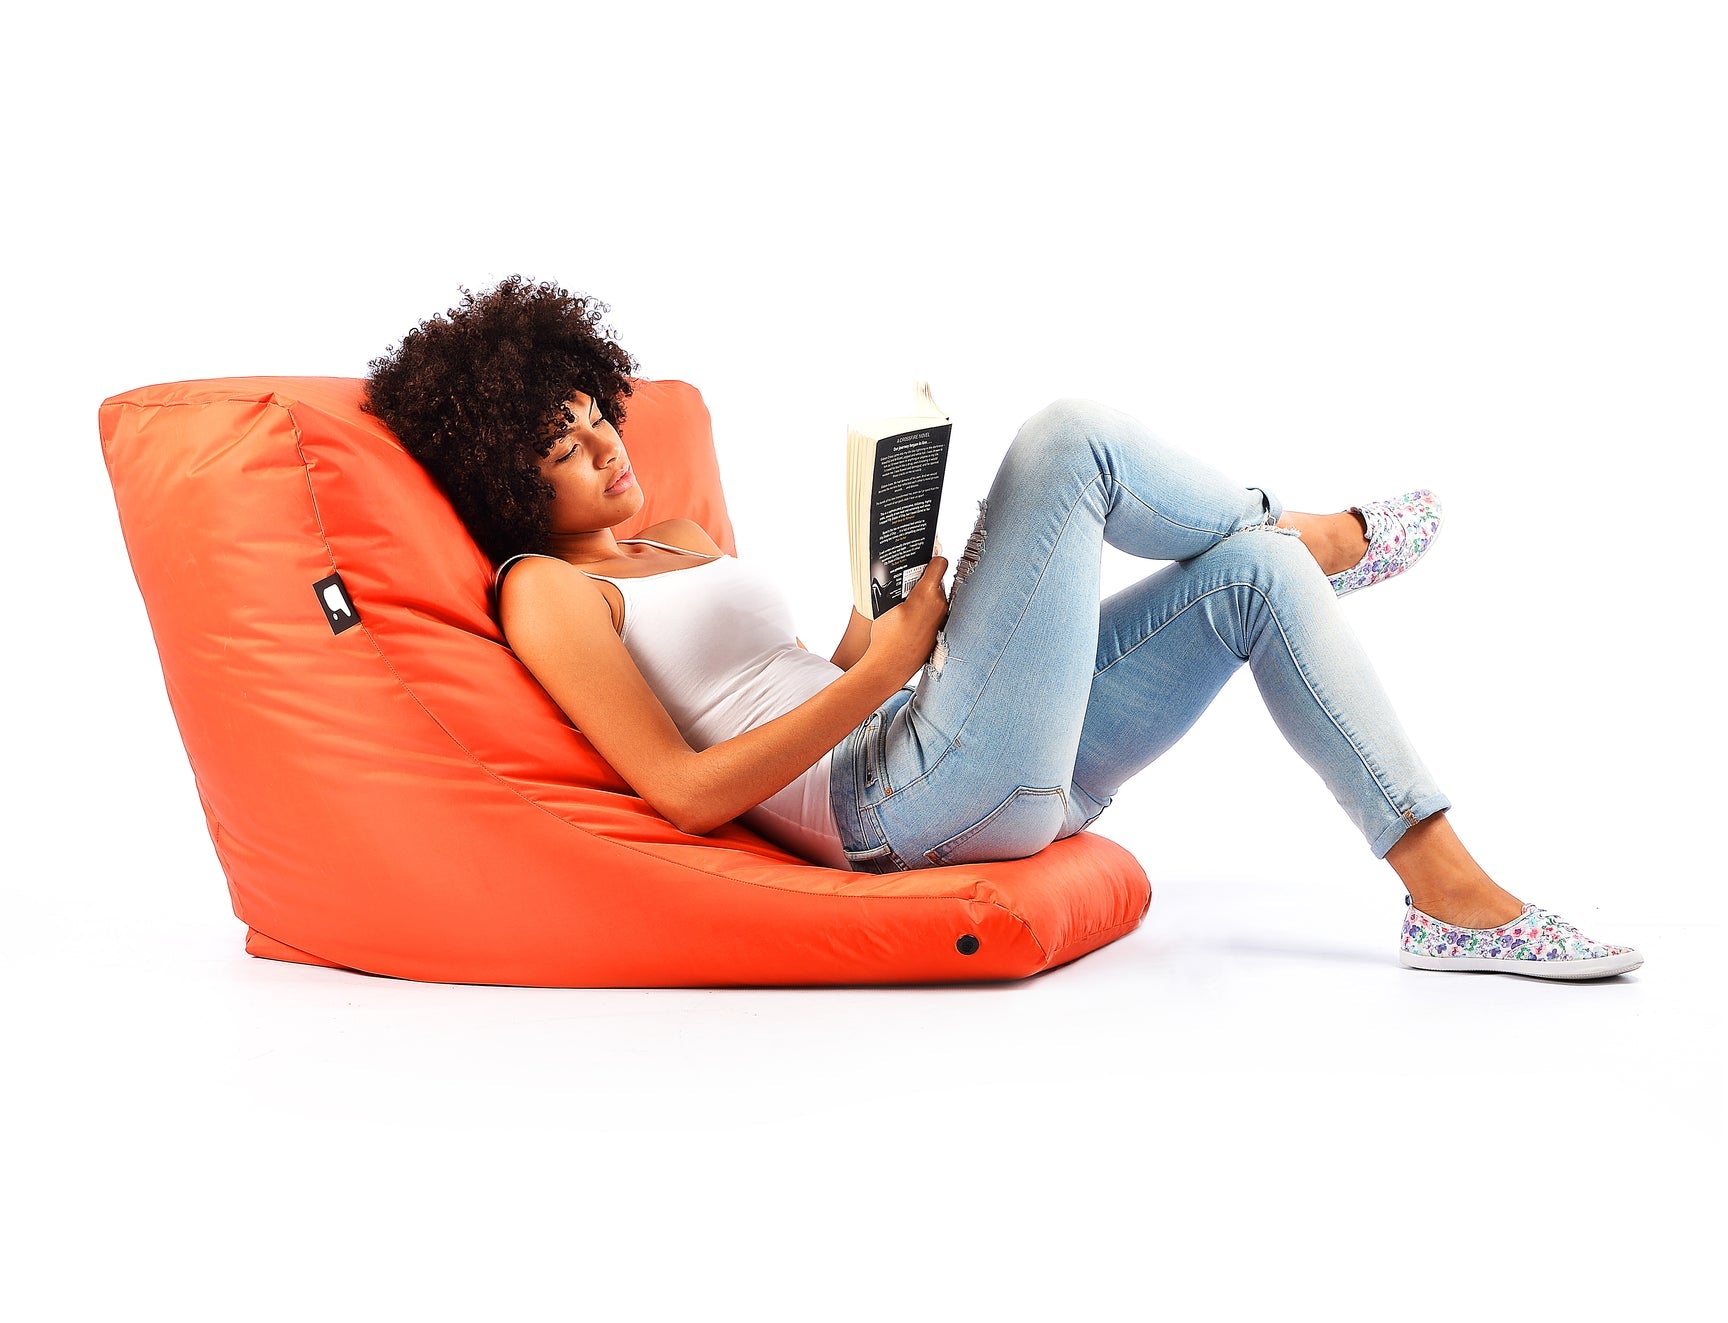 Lounger Beanbag Chairs, Anxiety and Stress Reducers